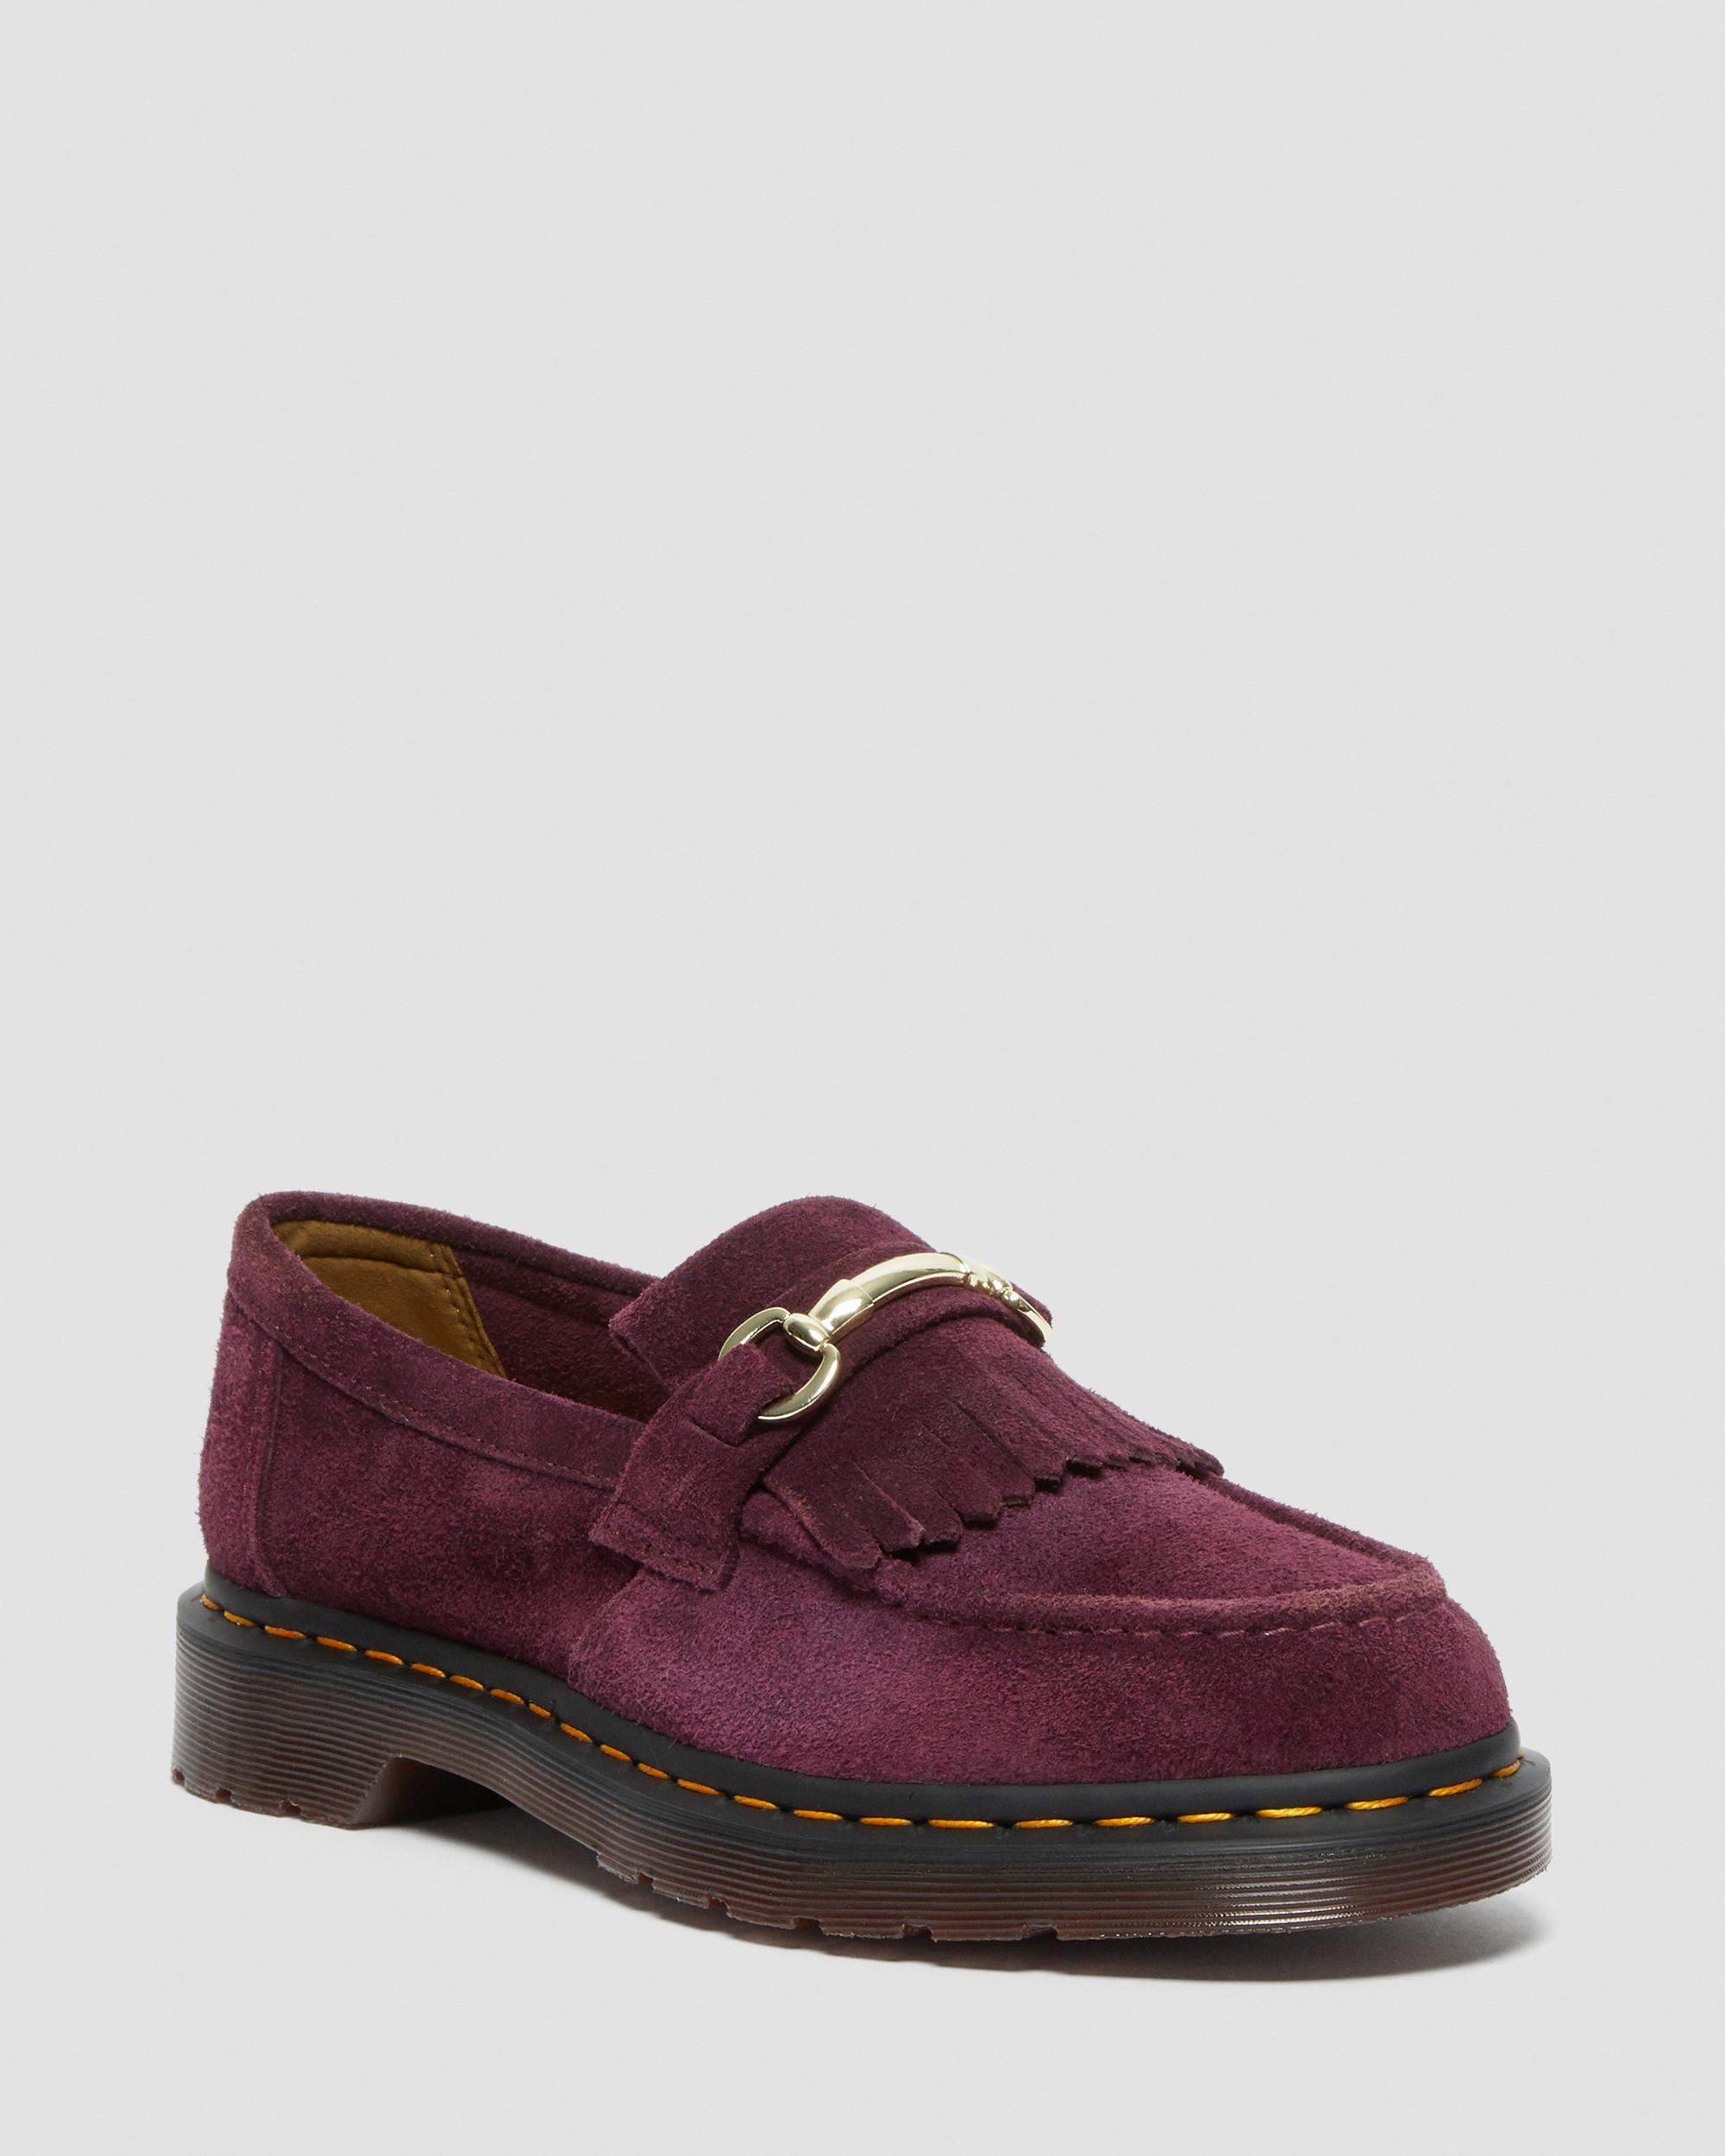 Adrian Snaffle Suede Loafers in Plum   Dr. Martens